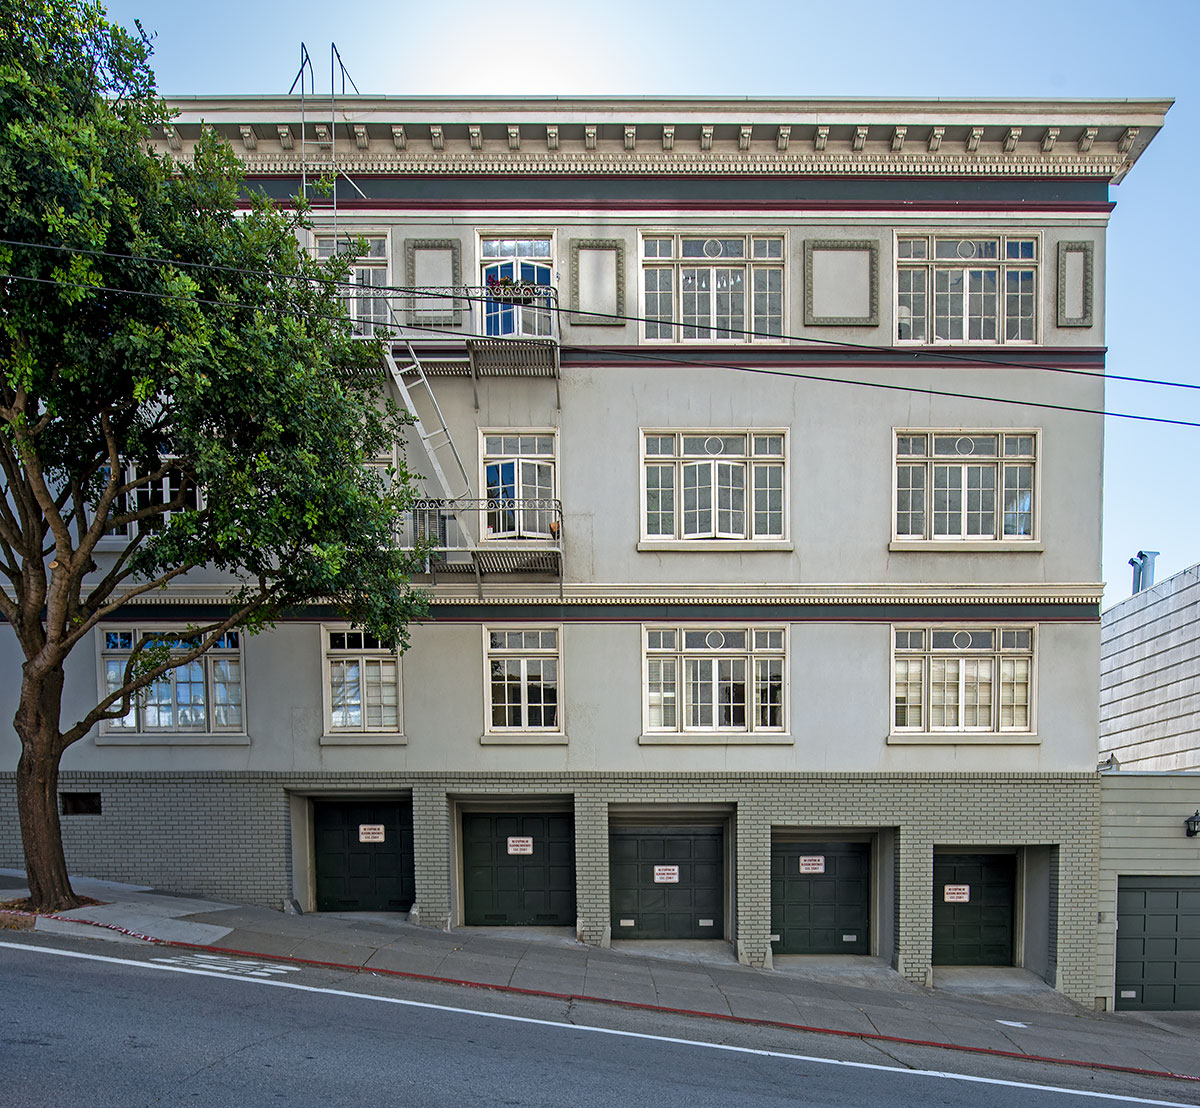 2155 Buchanan Street in Pacific Heights, designed by Edward E. Young, built 1919